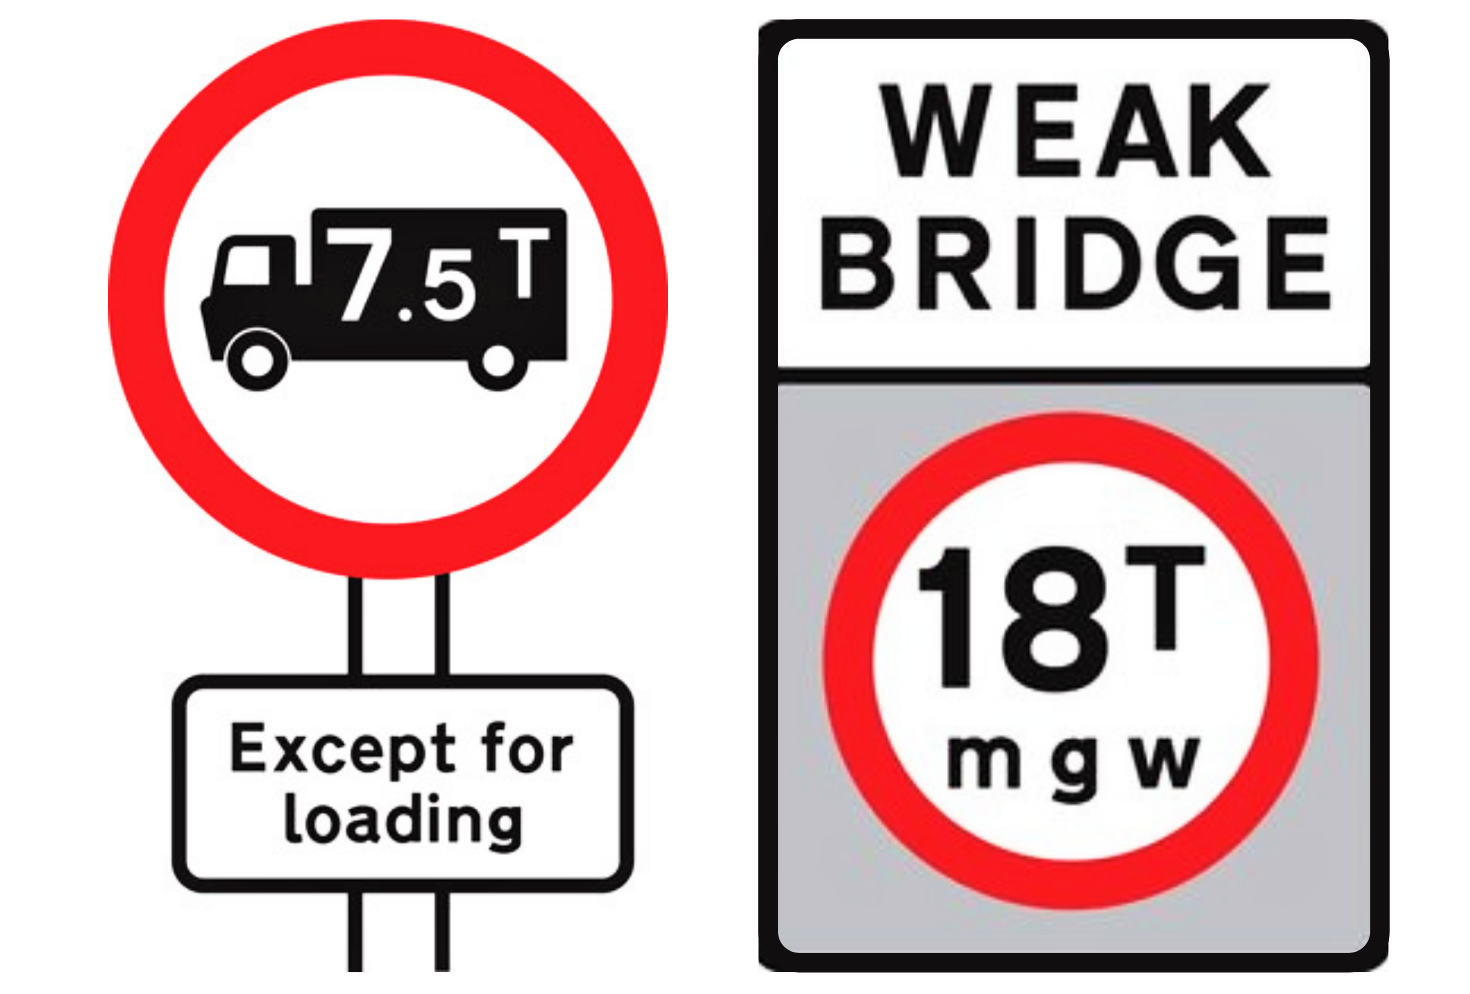 Road signs showing vehicle weight restrictions